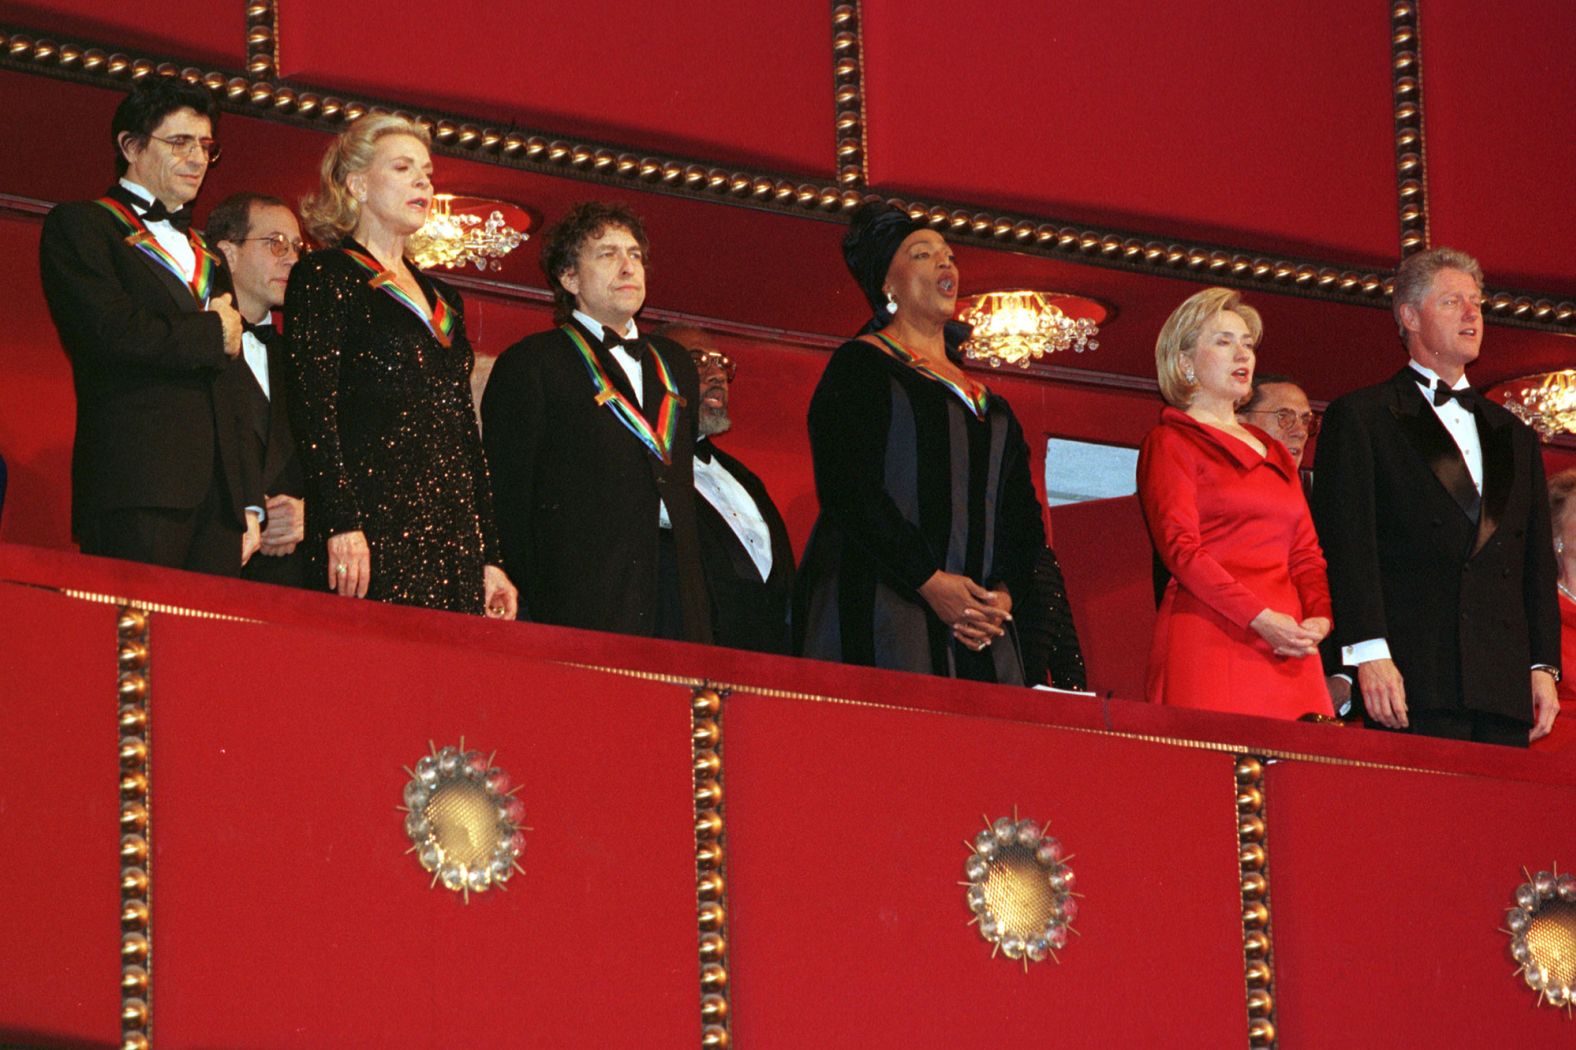 Dylan and other Kennedy Center honorees stand for the National Anthem with President Bill Clinton and first lady Hillary Clinton in 1997.